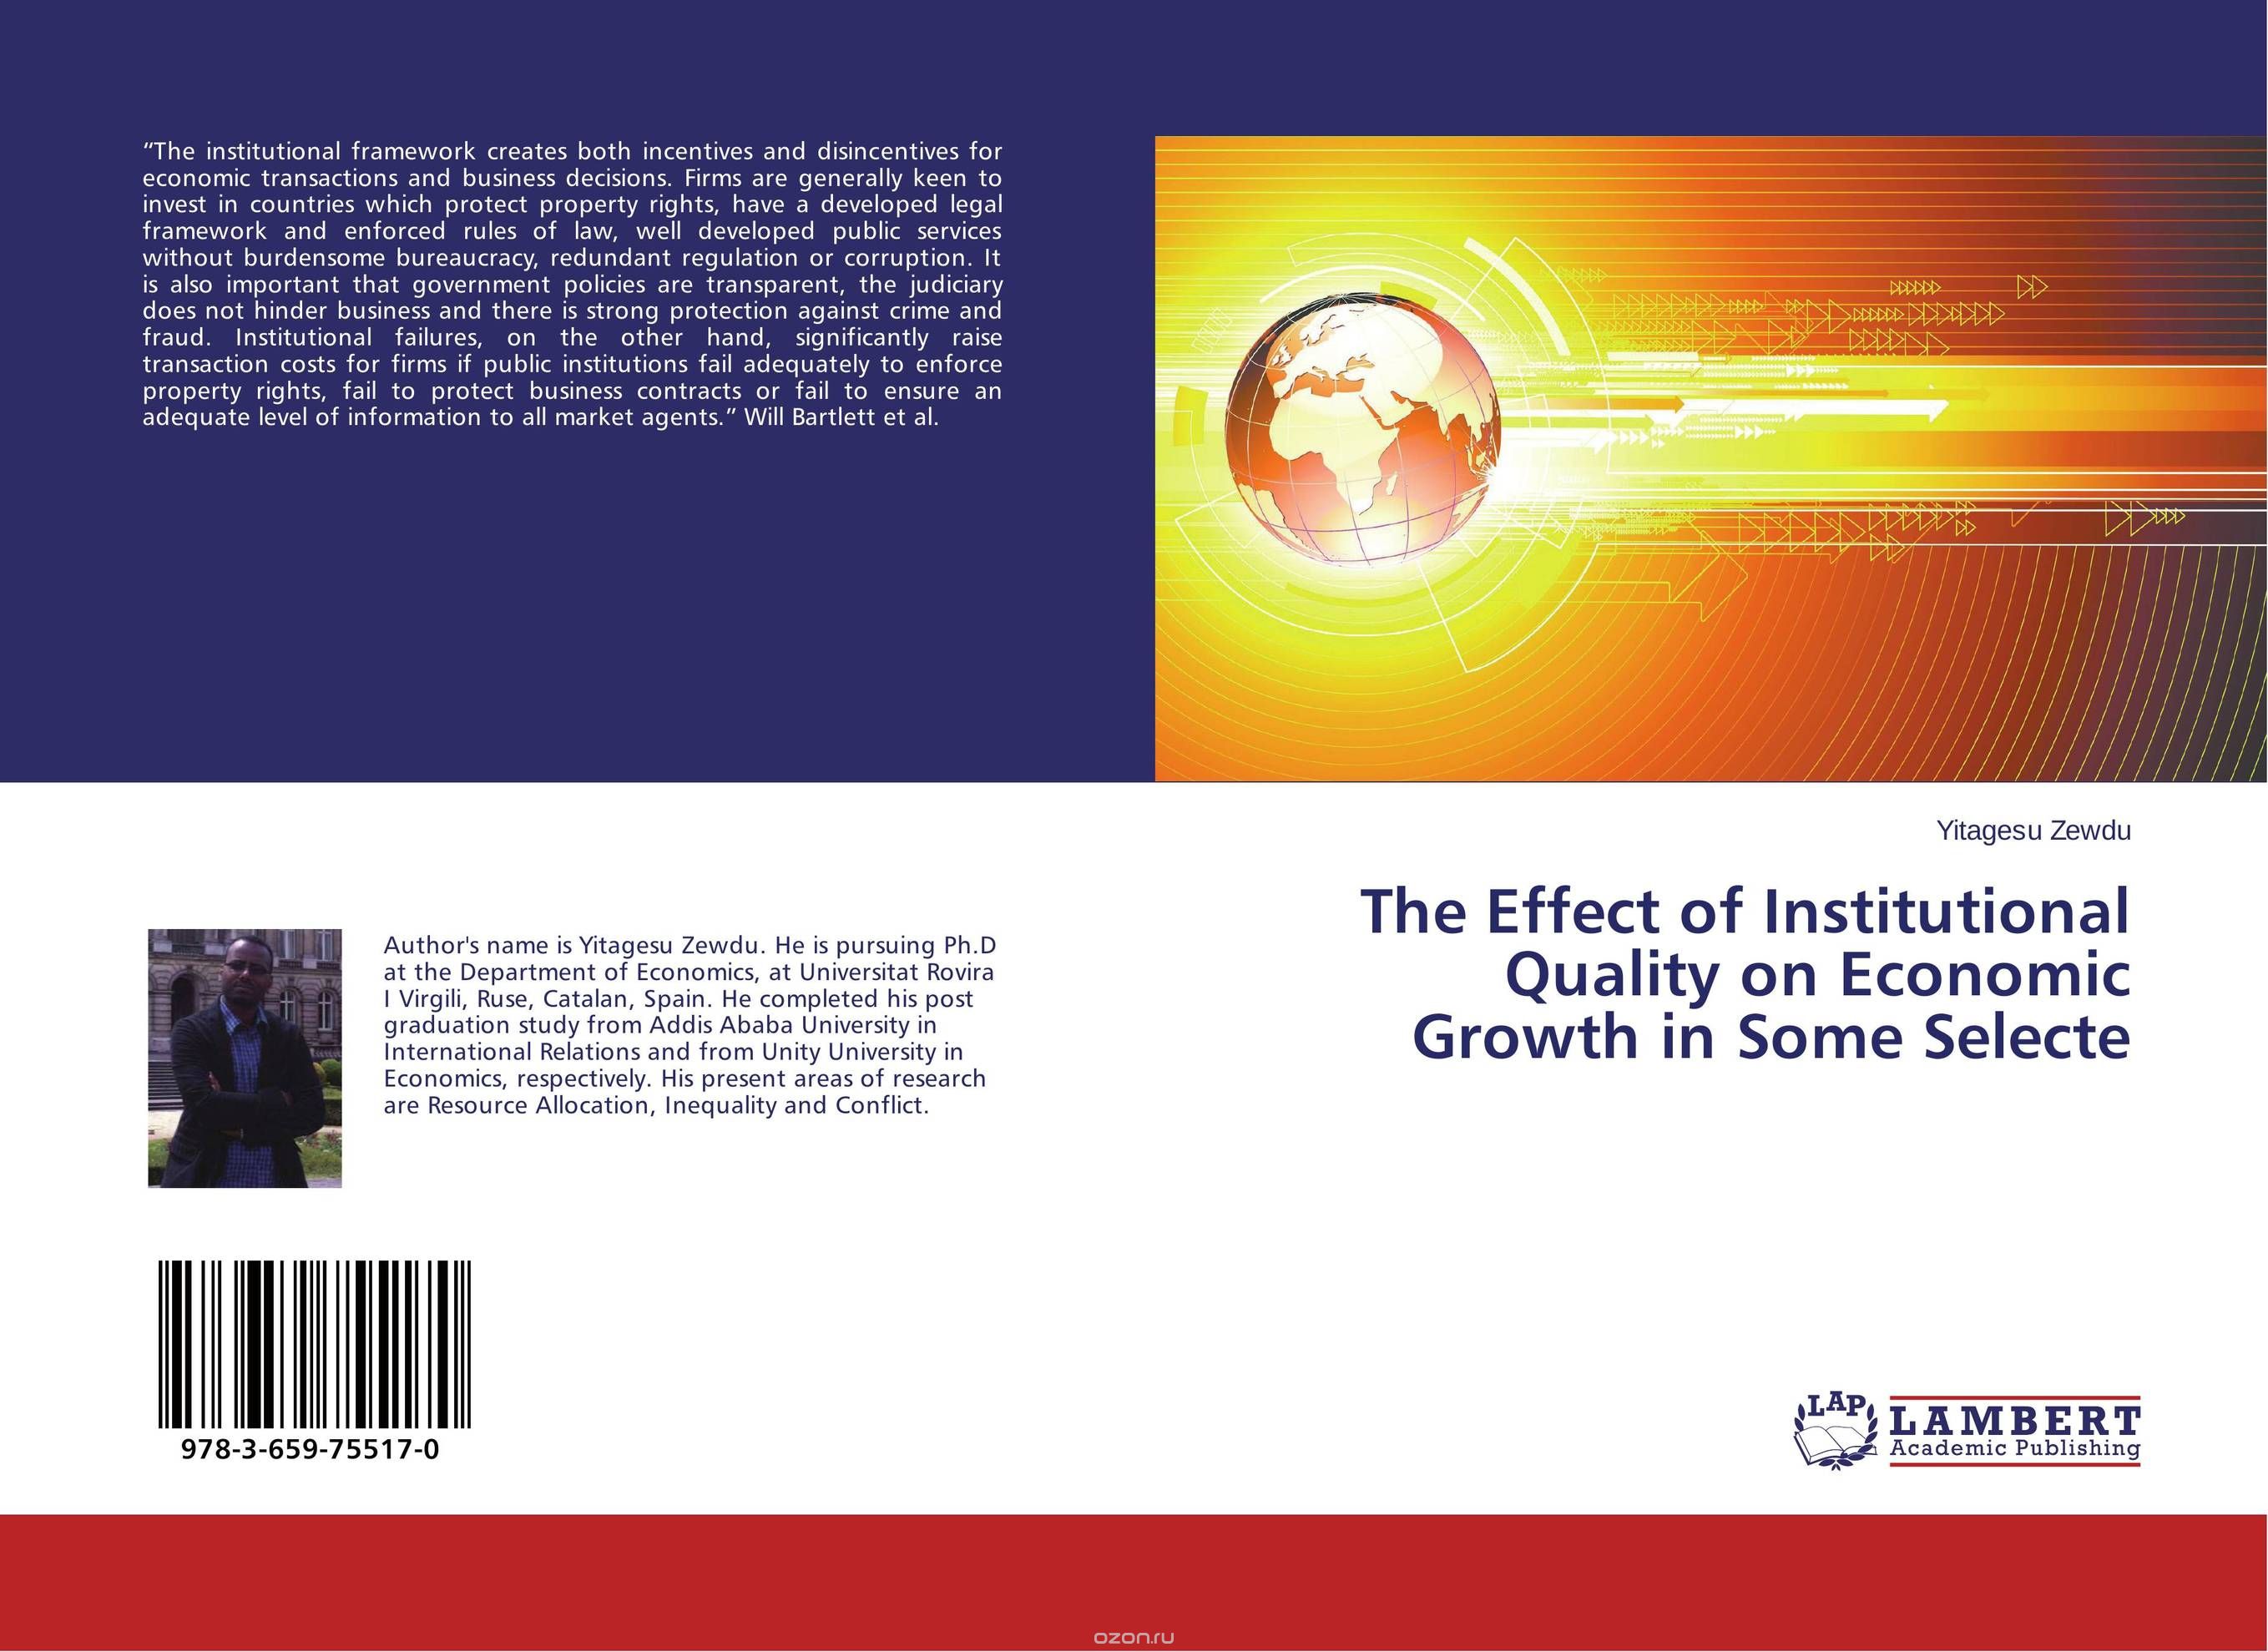 Скачать книгу "The Effect of Institutional Quality on Economic Growth in Some Selecte"